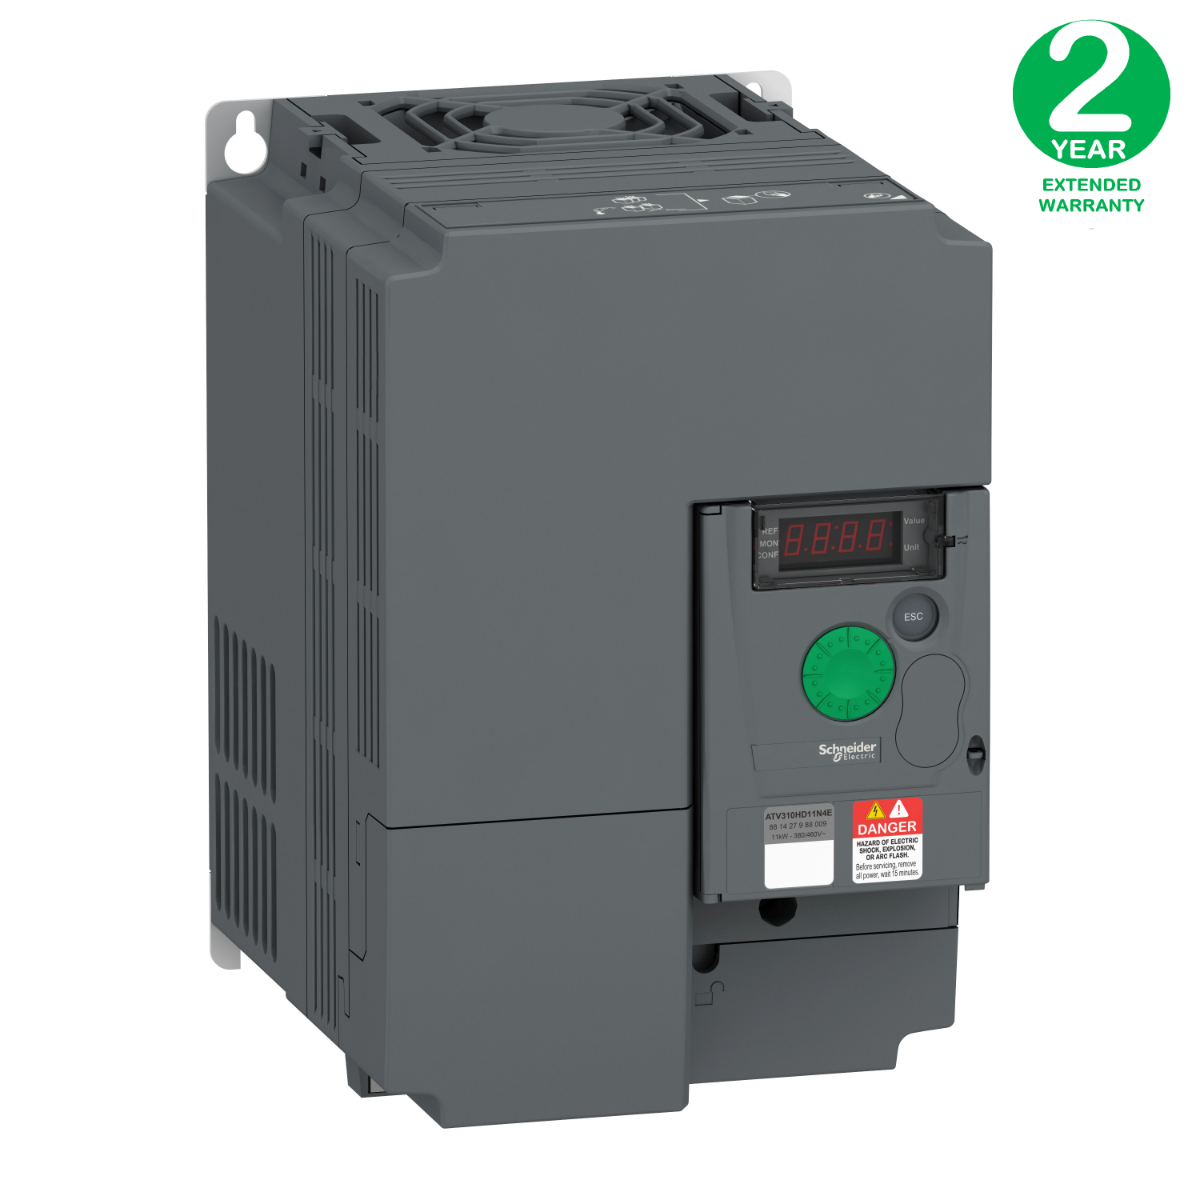 variable speed drive ATV310, 11 kW, 15 hp, 380...460 V, 3 phase, without filter + Extended Warranty 2 years